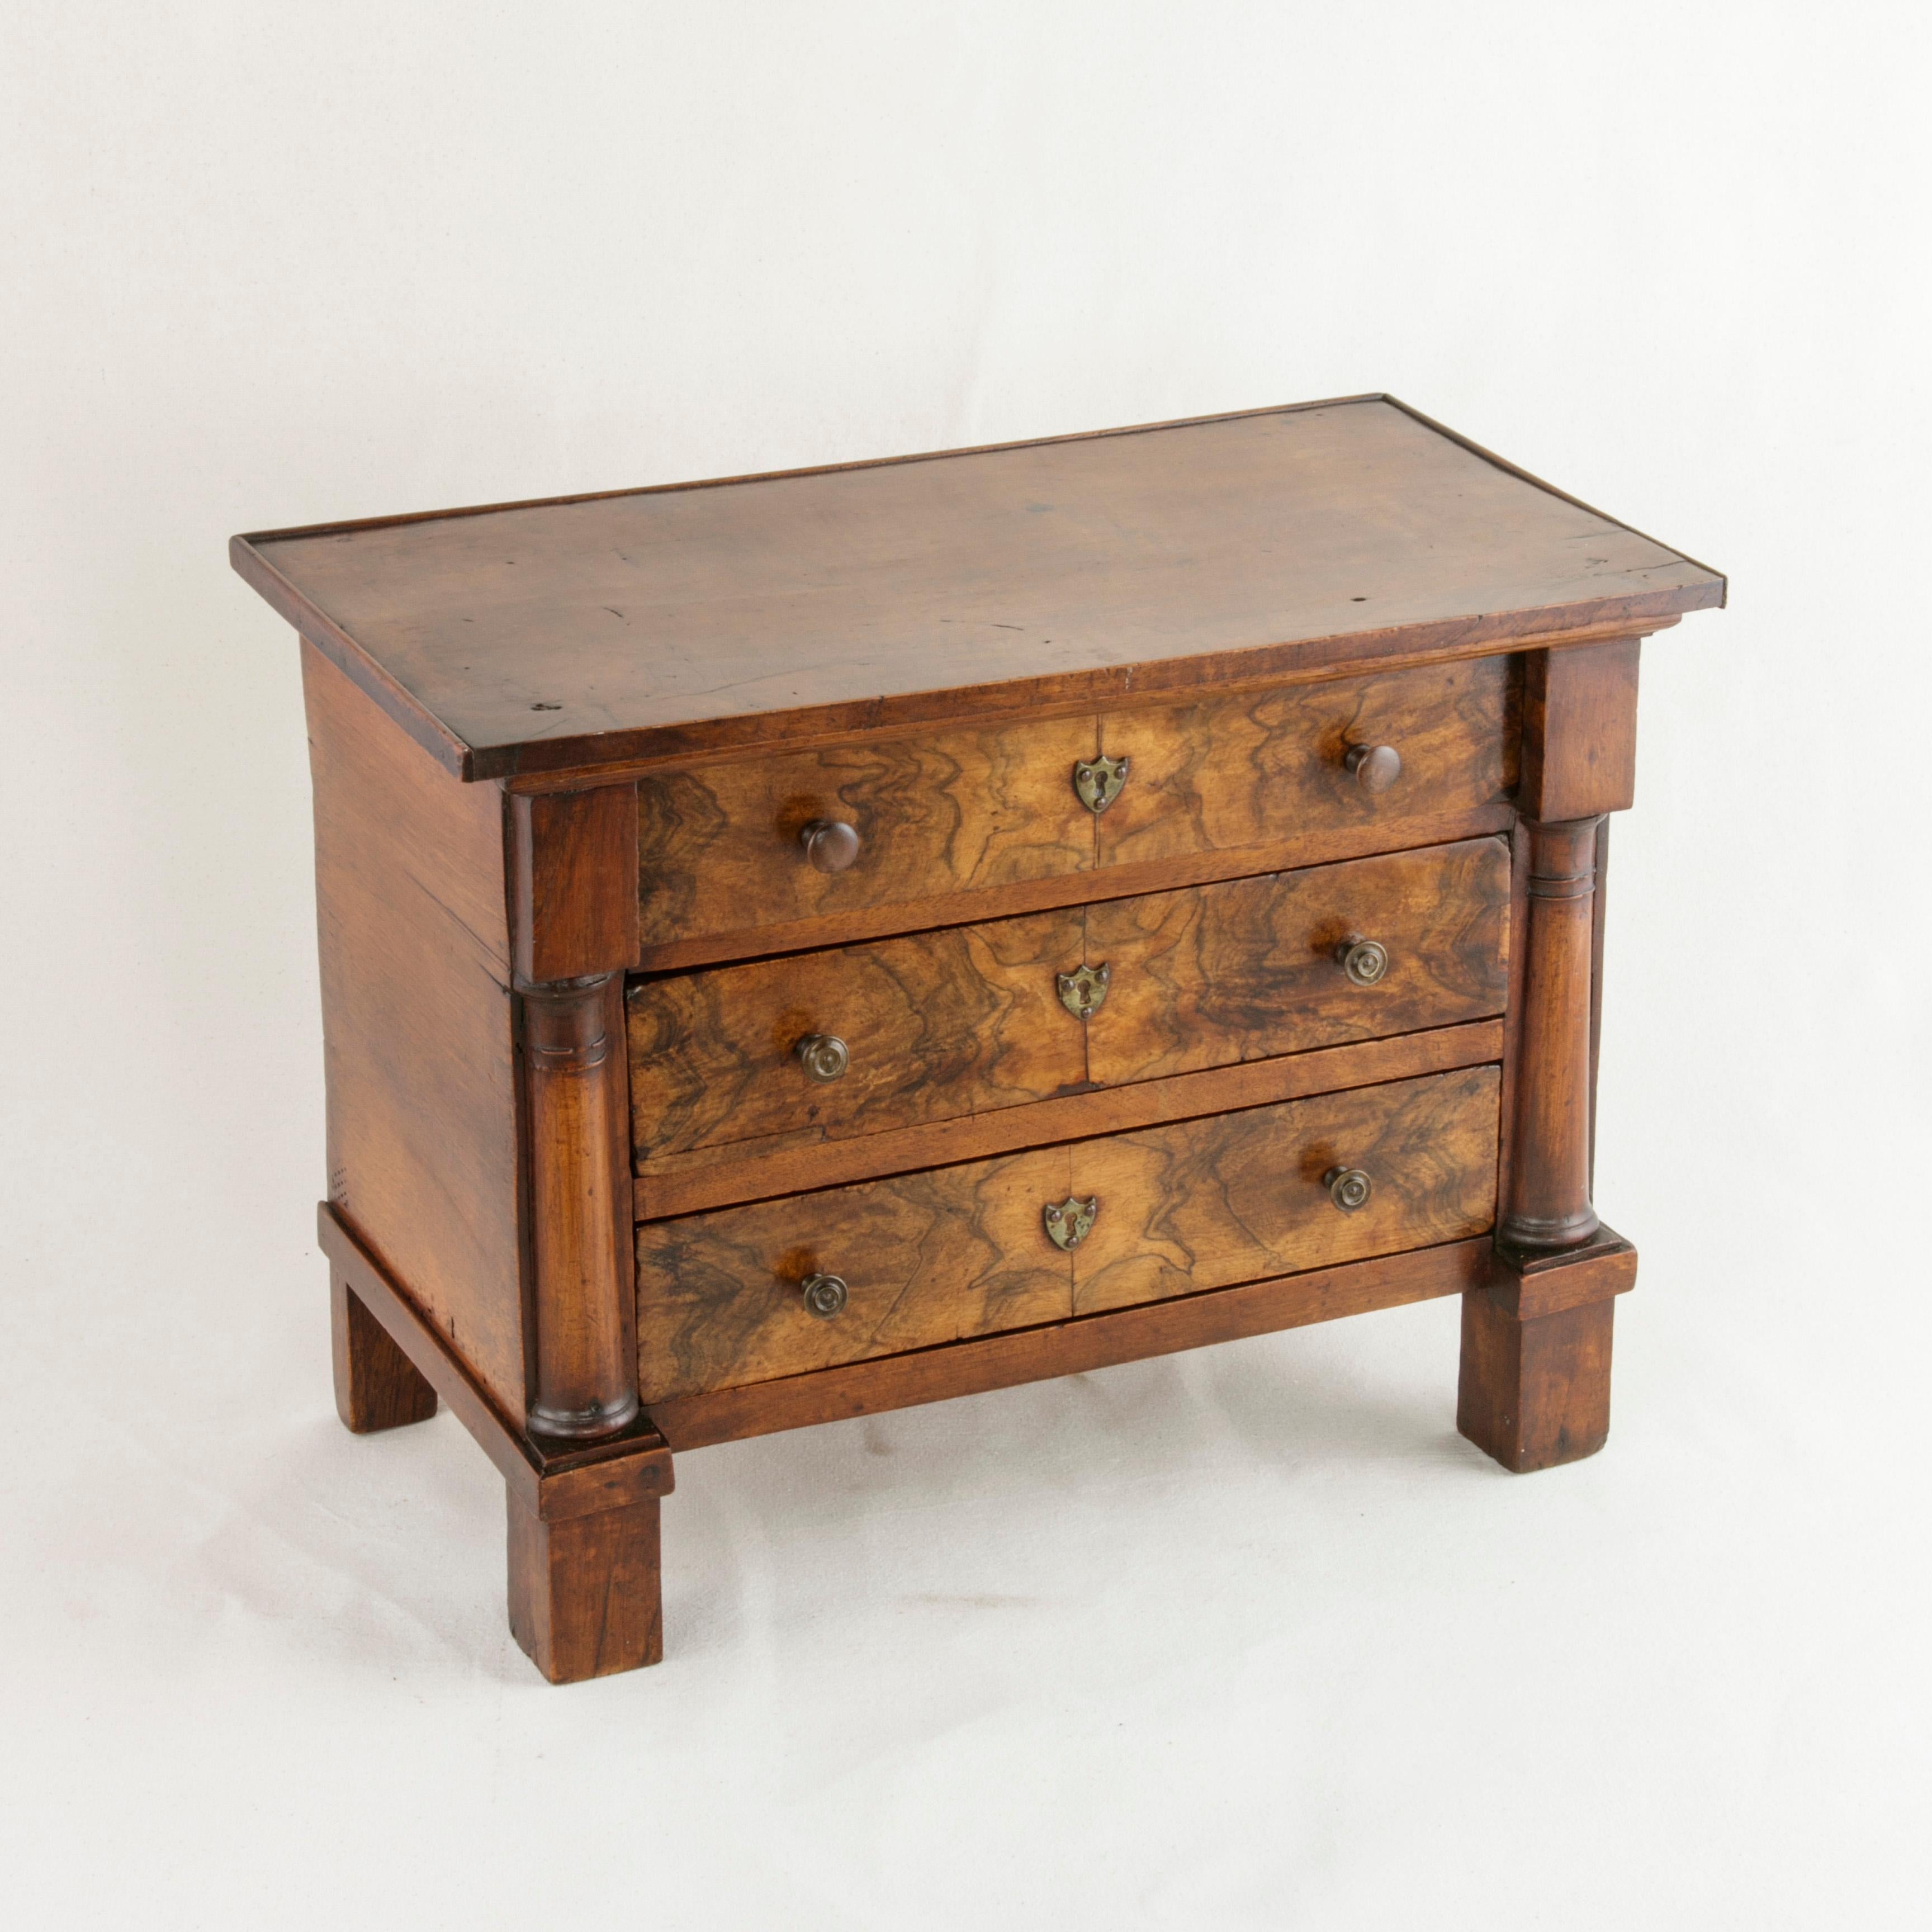 This miniature chest from the early 19th century is a 